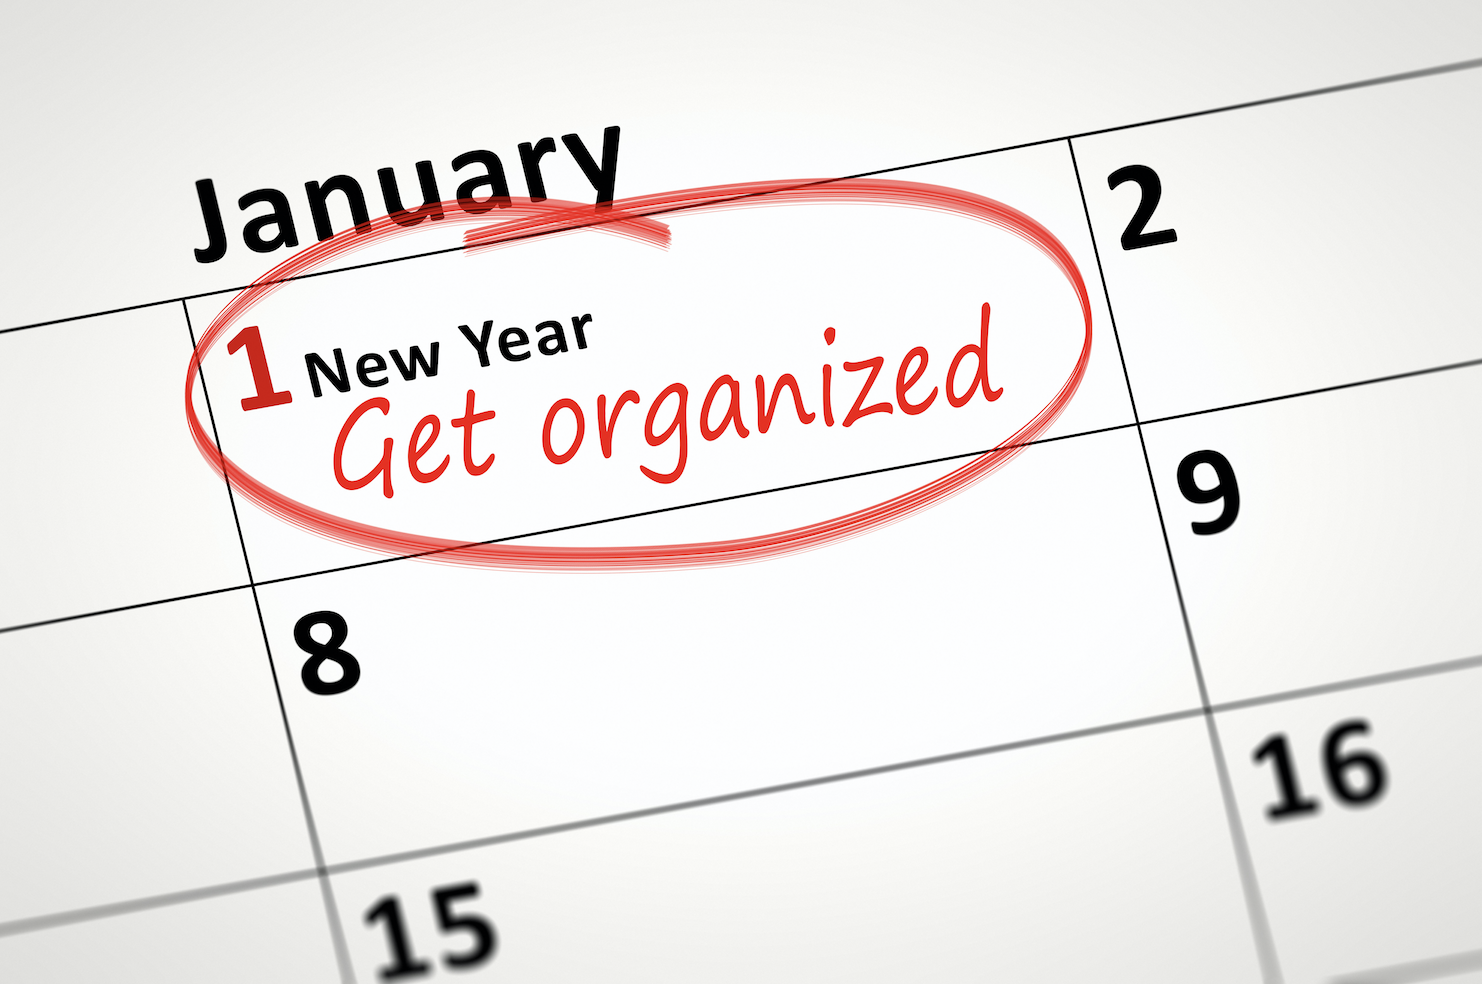 Trying to get organized for the new year? Here are some tips from CarolinaRES in Greenville, SC